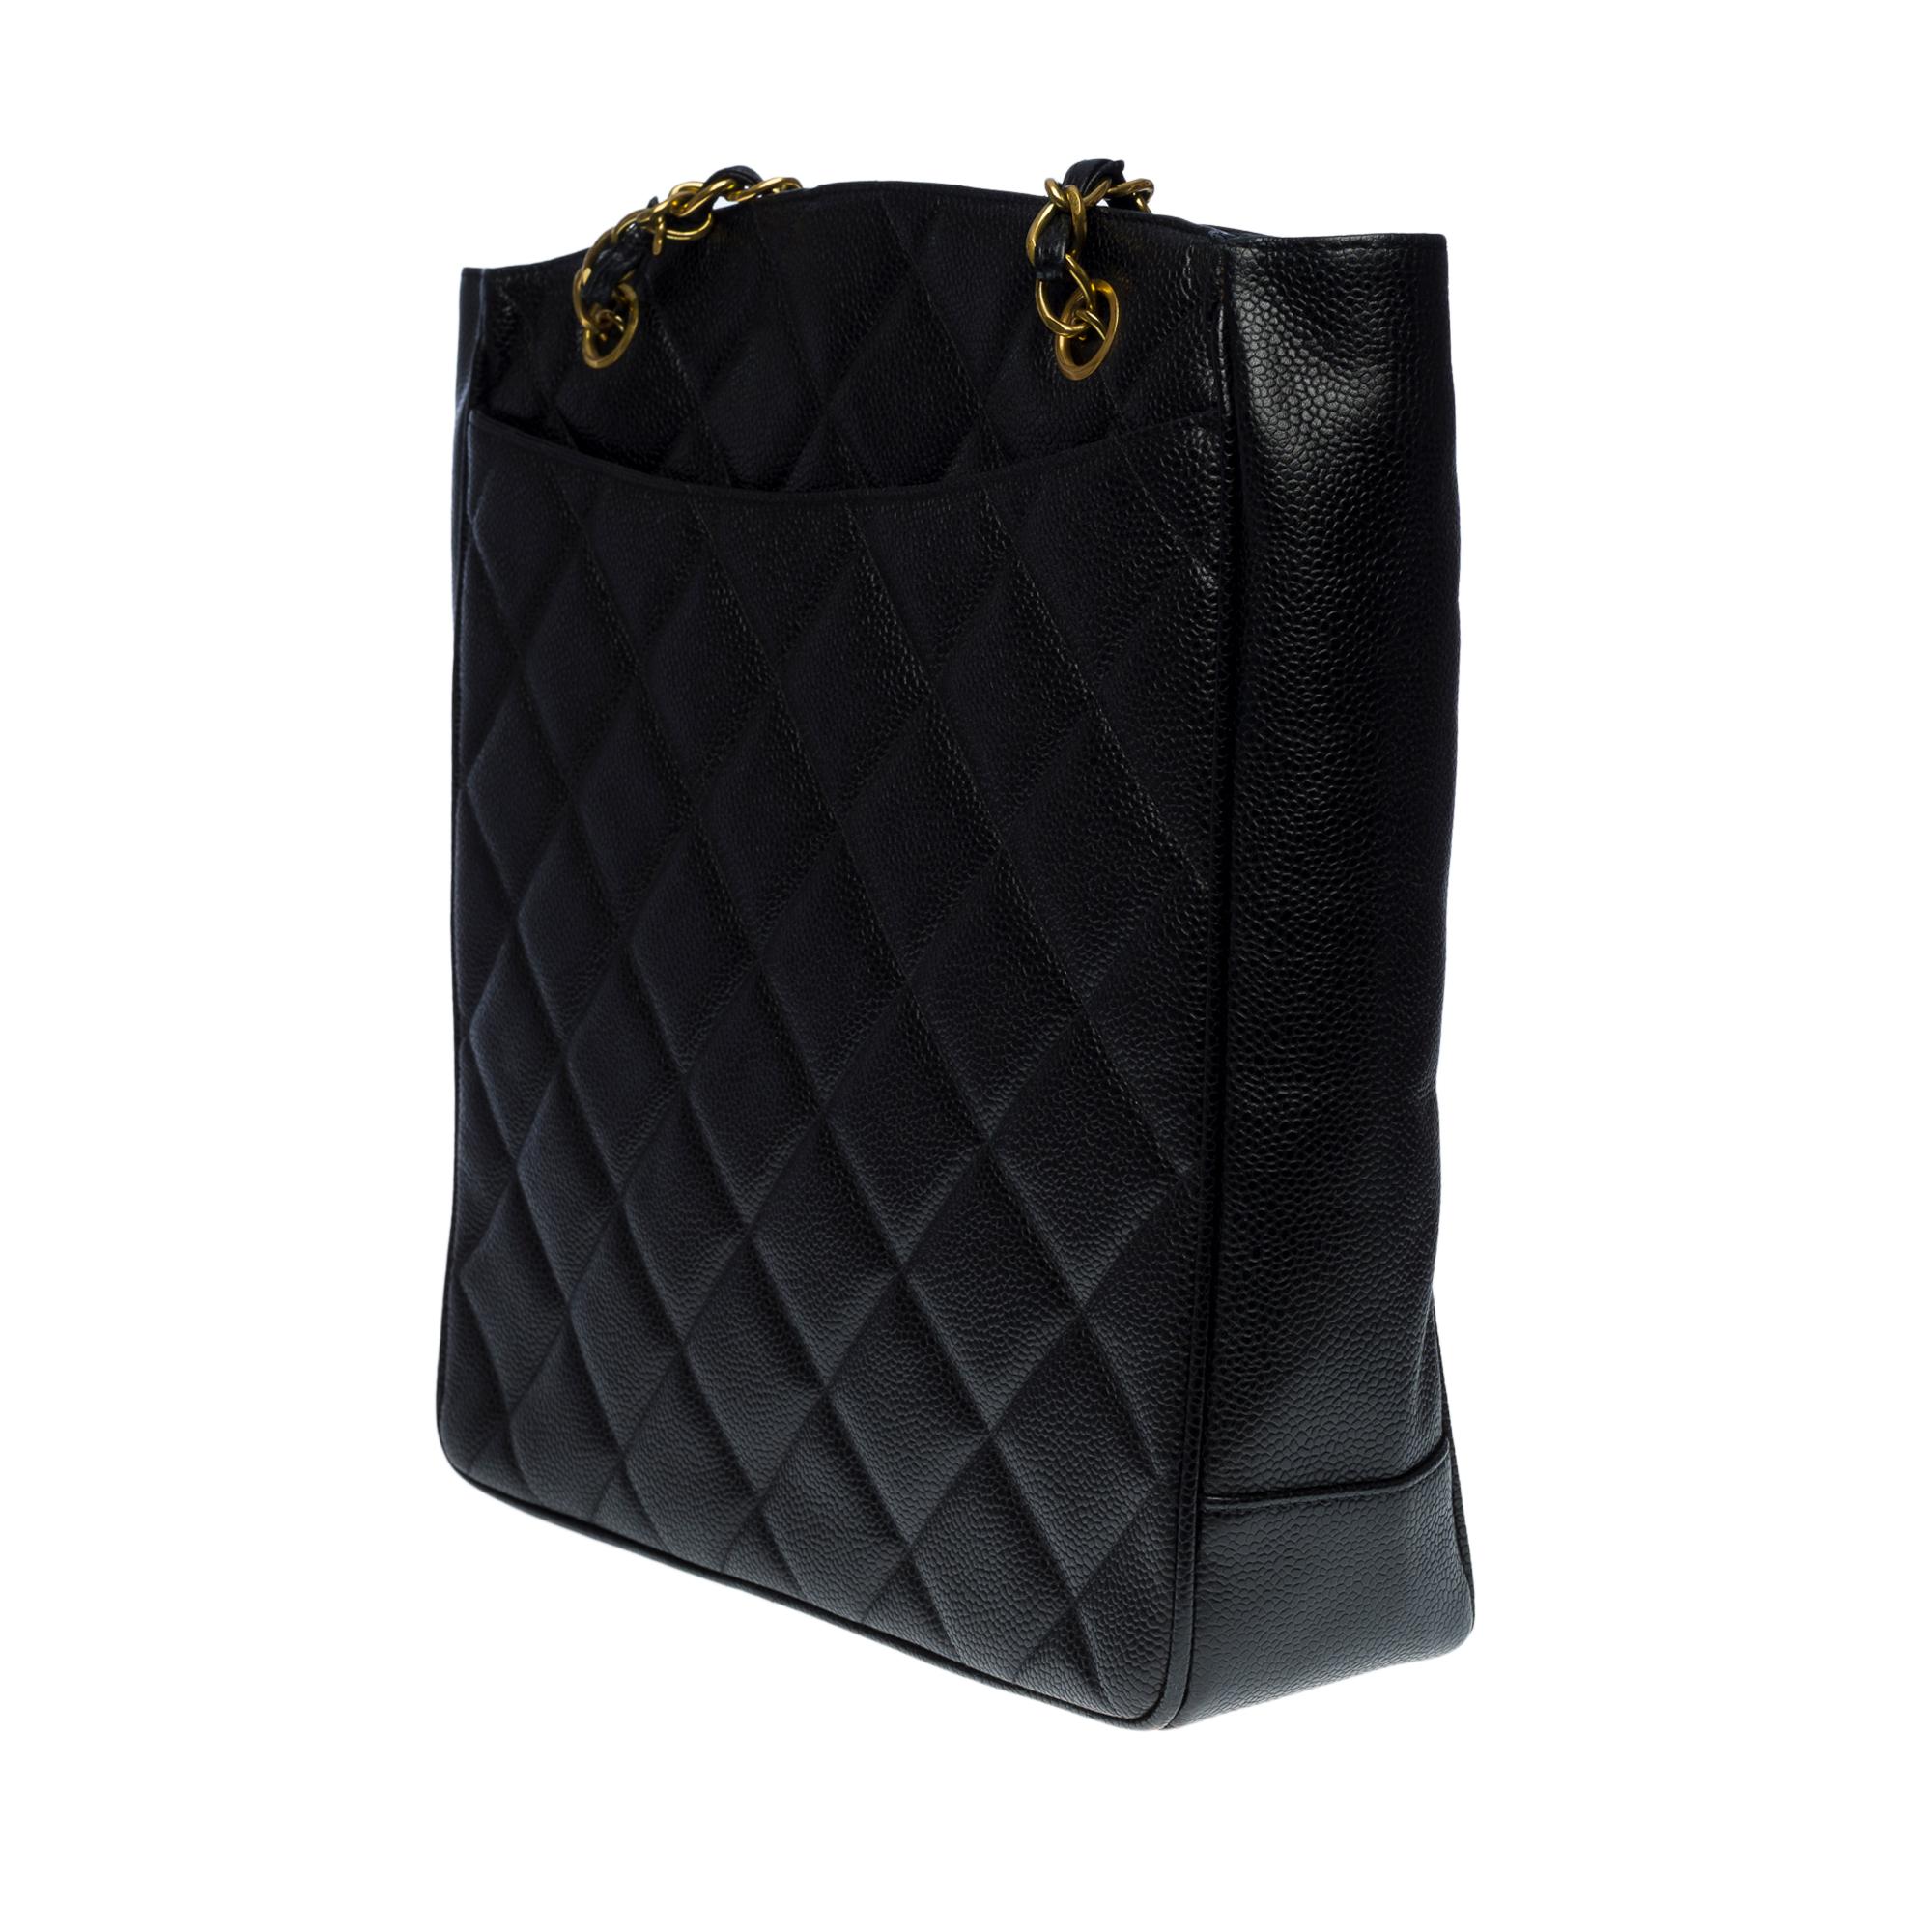 Women's Amazing Chanel Shopping Tote in black Caviar quilted leather and gold hardware